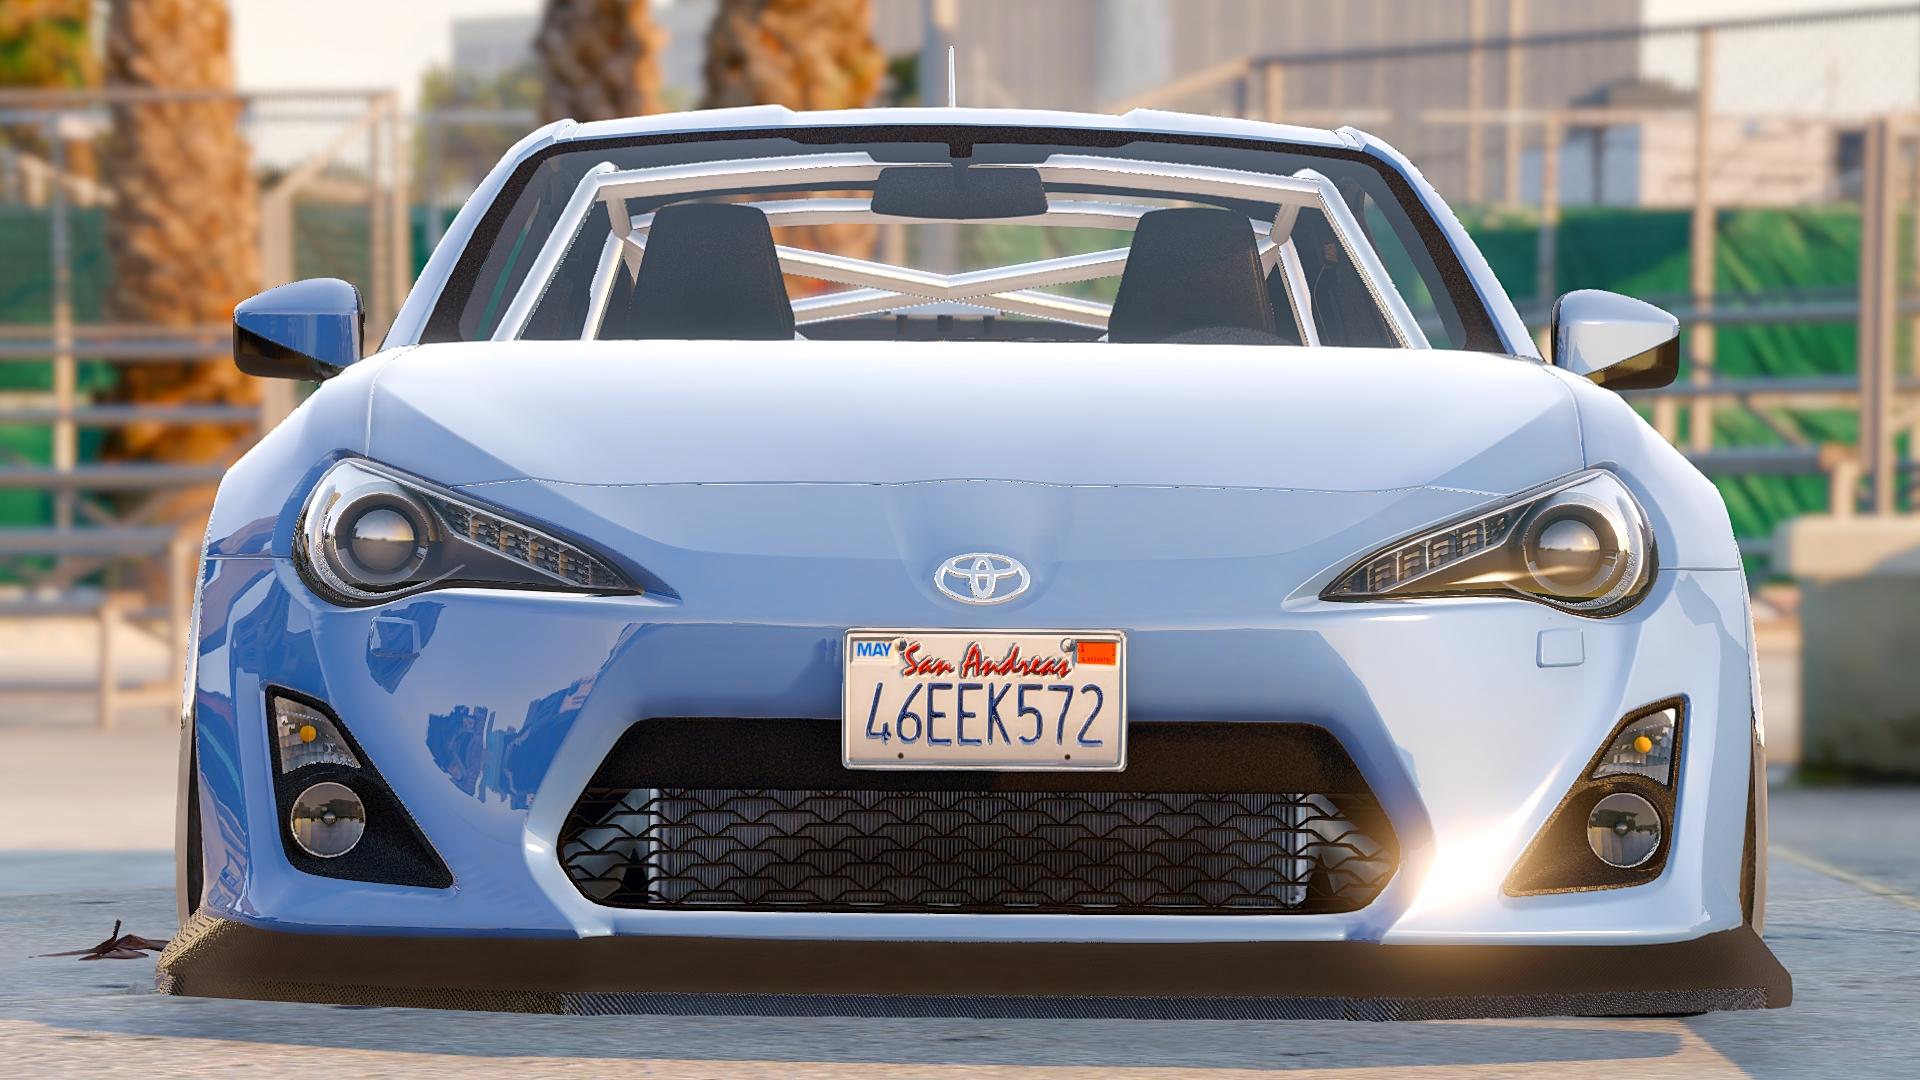 Rocket Bunny Toyota GT 86 Mod for GTA 5 Is Stupid Yet Cool